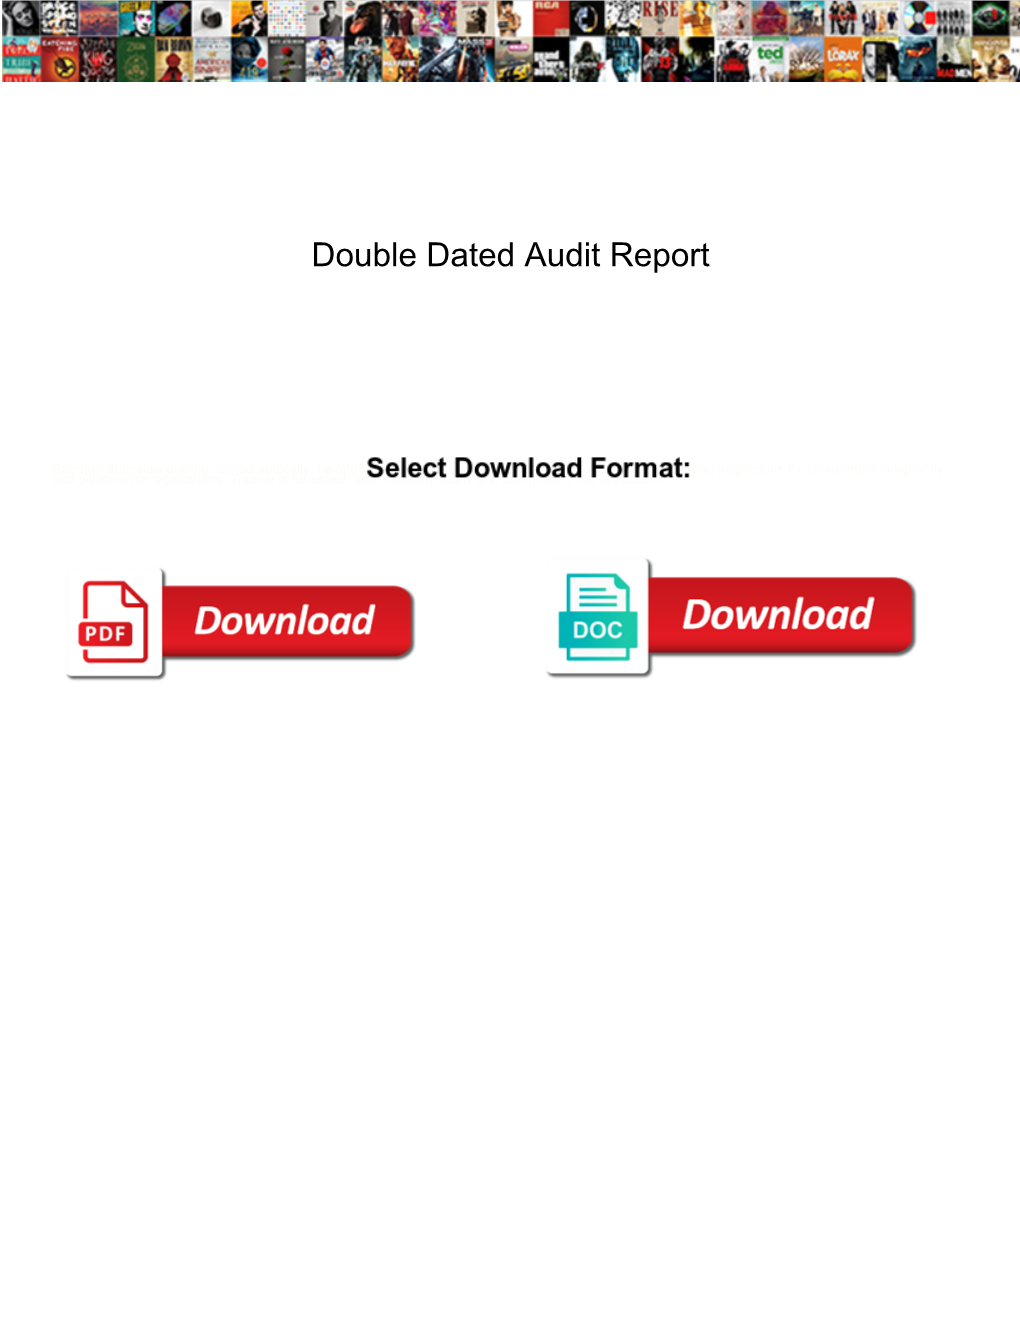 Double Dated Audit Report